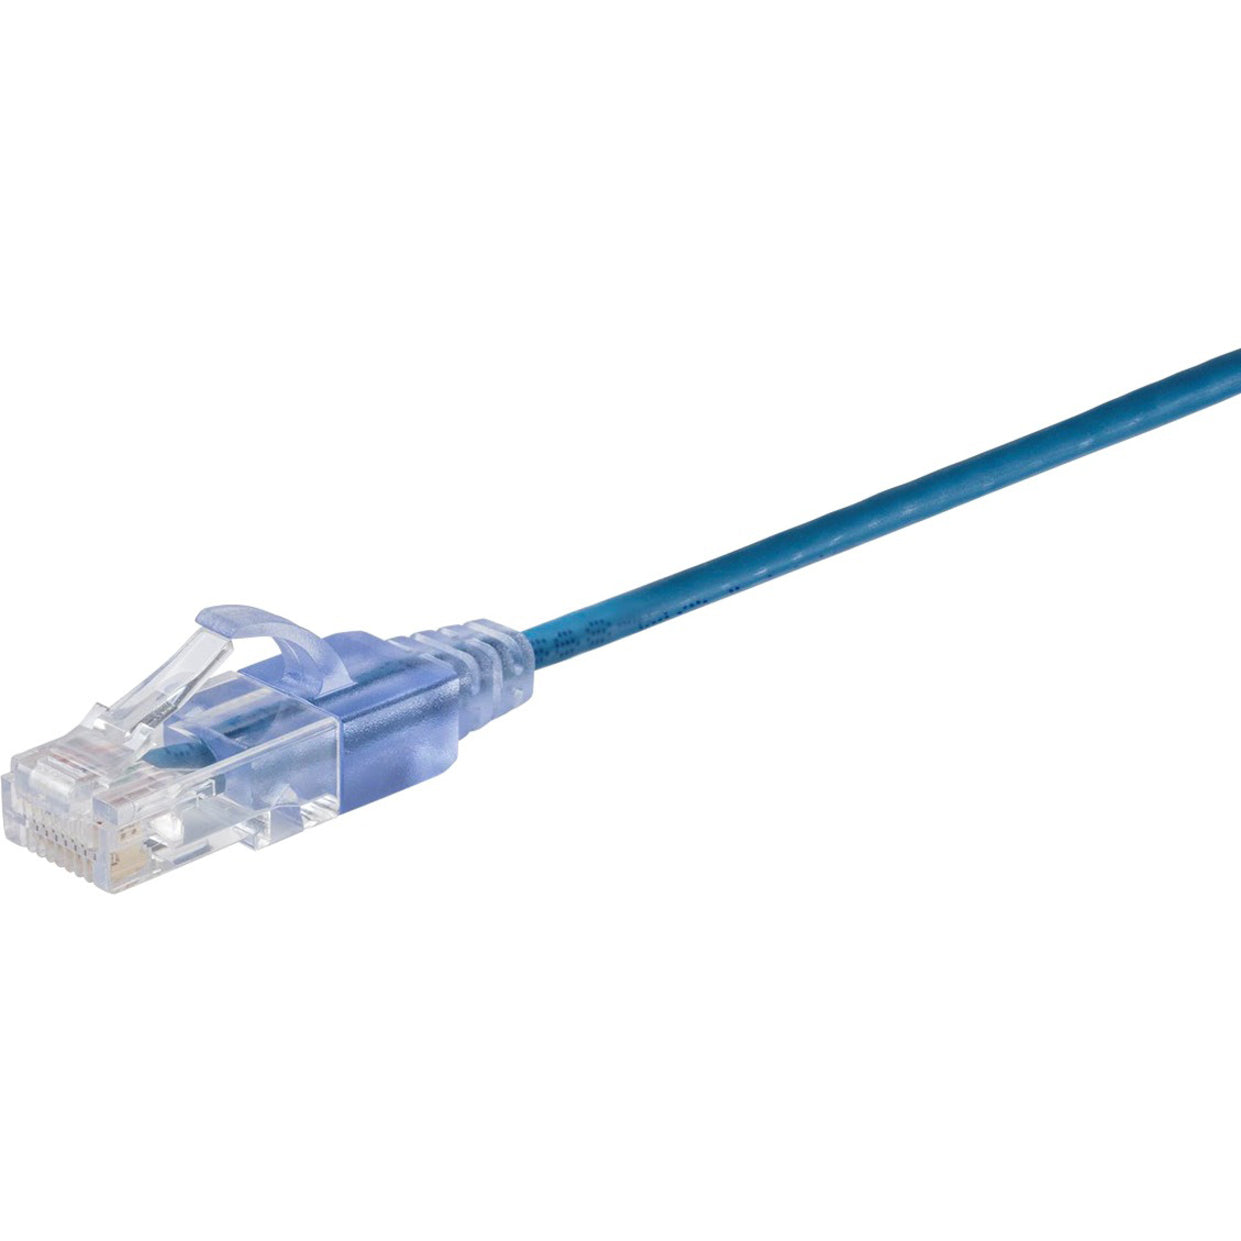 Monoprice 15162 SlimRun Cat6A Ethernet Network Patch Cable 7ft Blue, 10-Pack